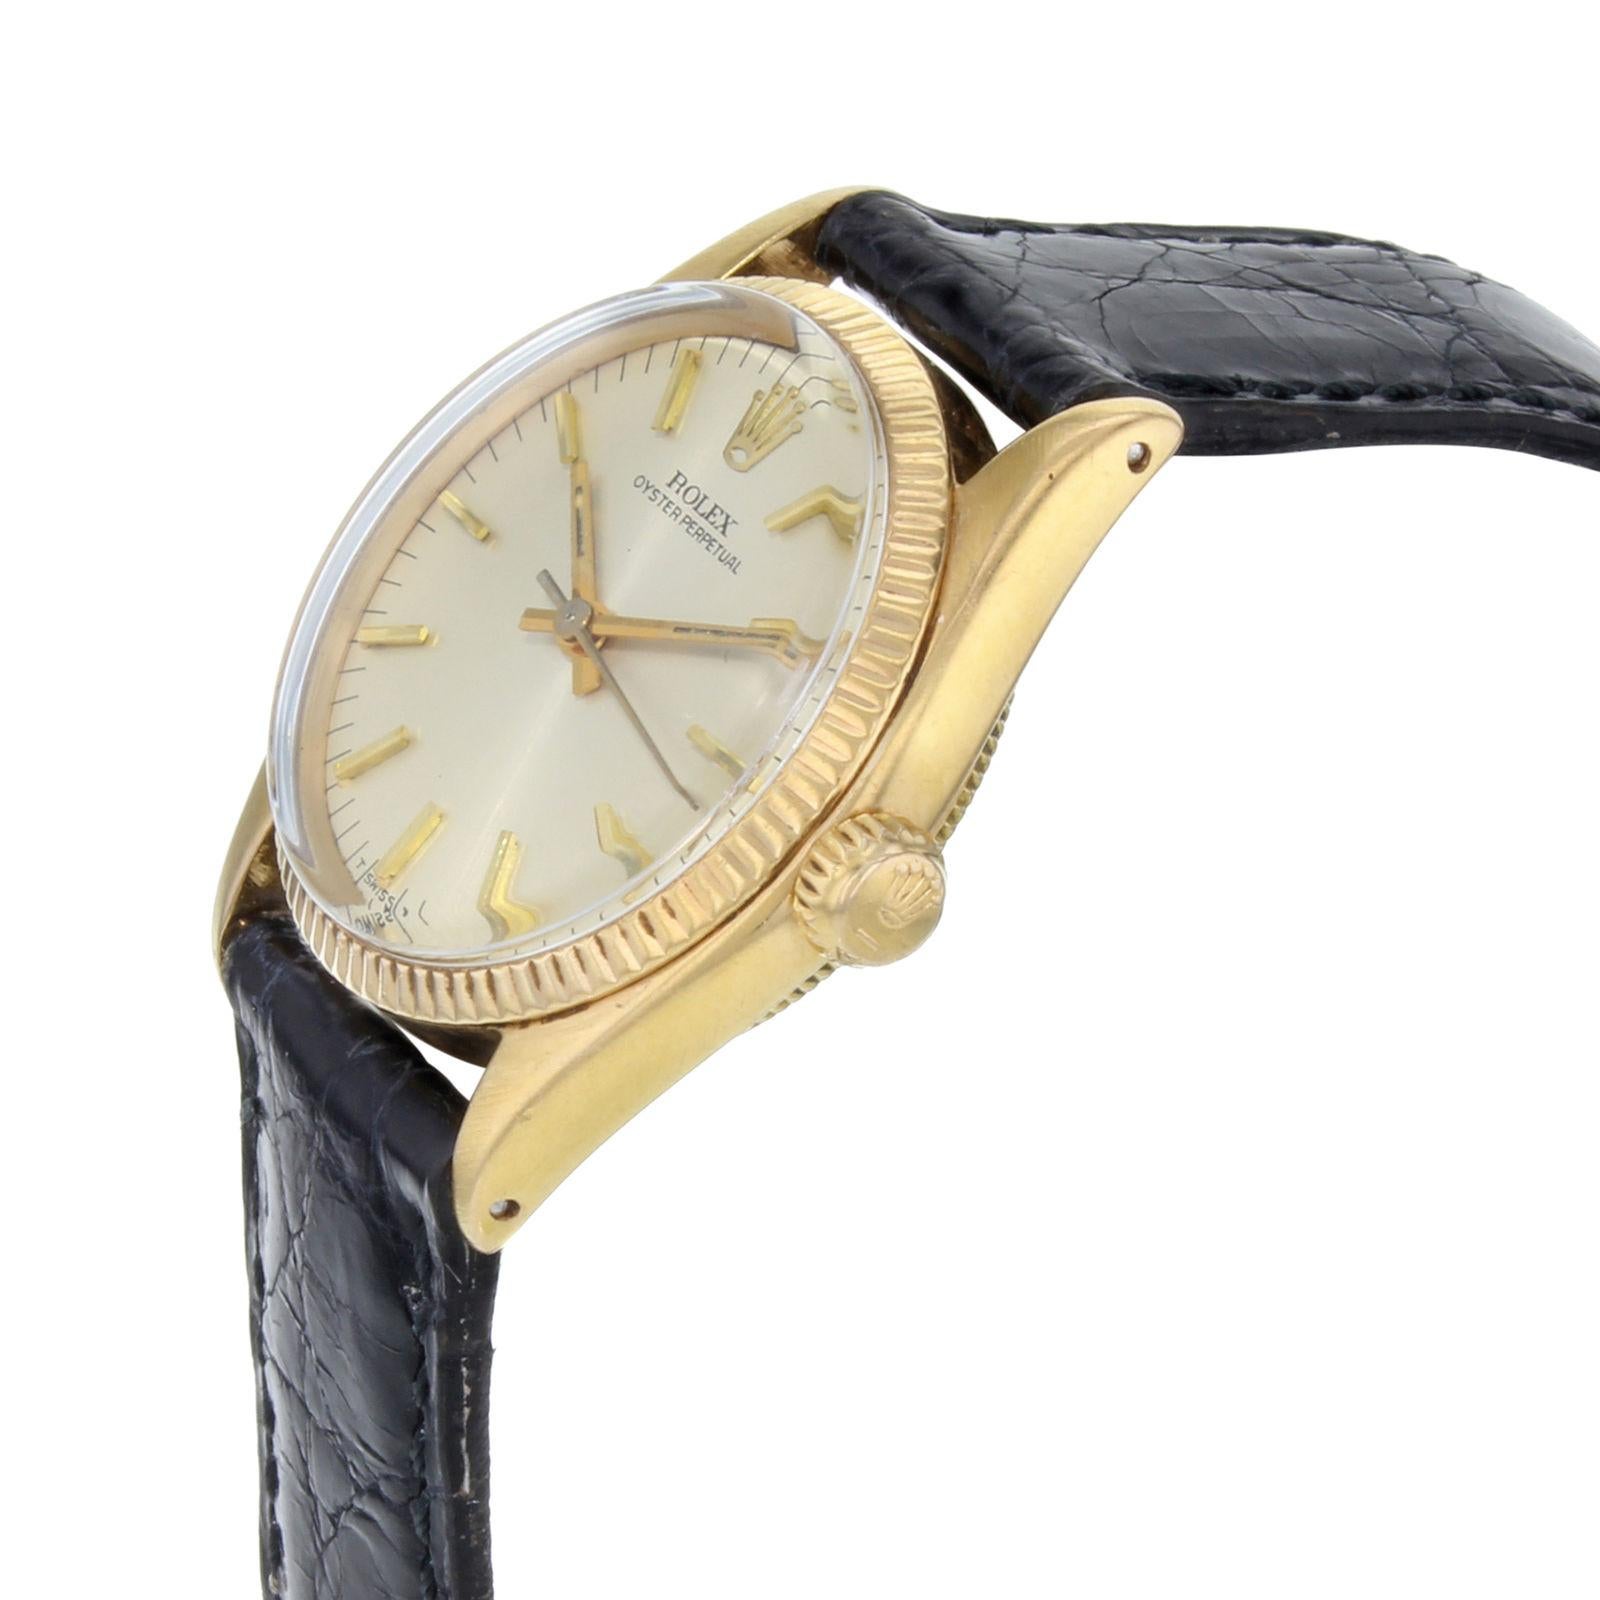 (15567)
This pre-owned Rolex Oyster Perpetual 6551 is a beautiful Womens timepiece that is powered by an automatic movement which is cased in a yellow gold case. It has a round shape face, no features dial and has hand sticks style markers. It is